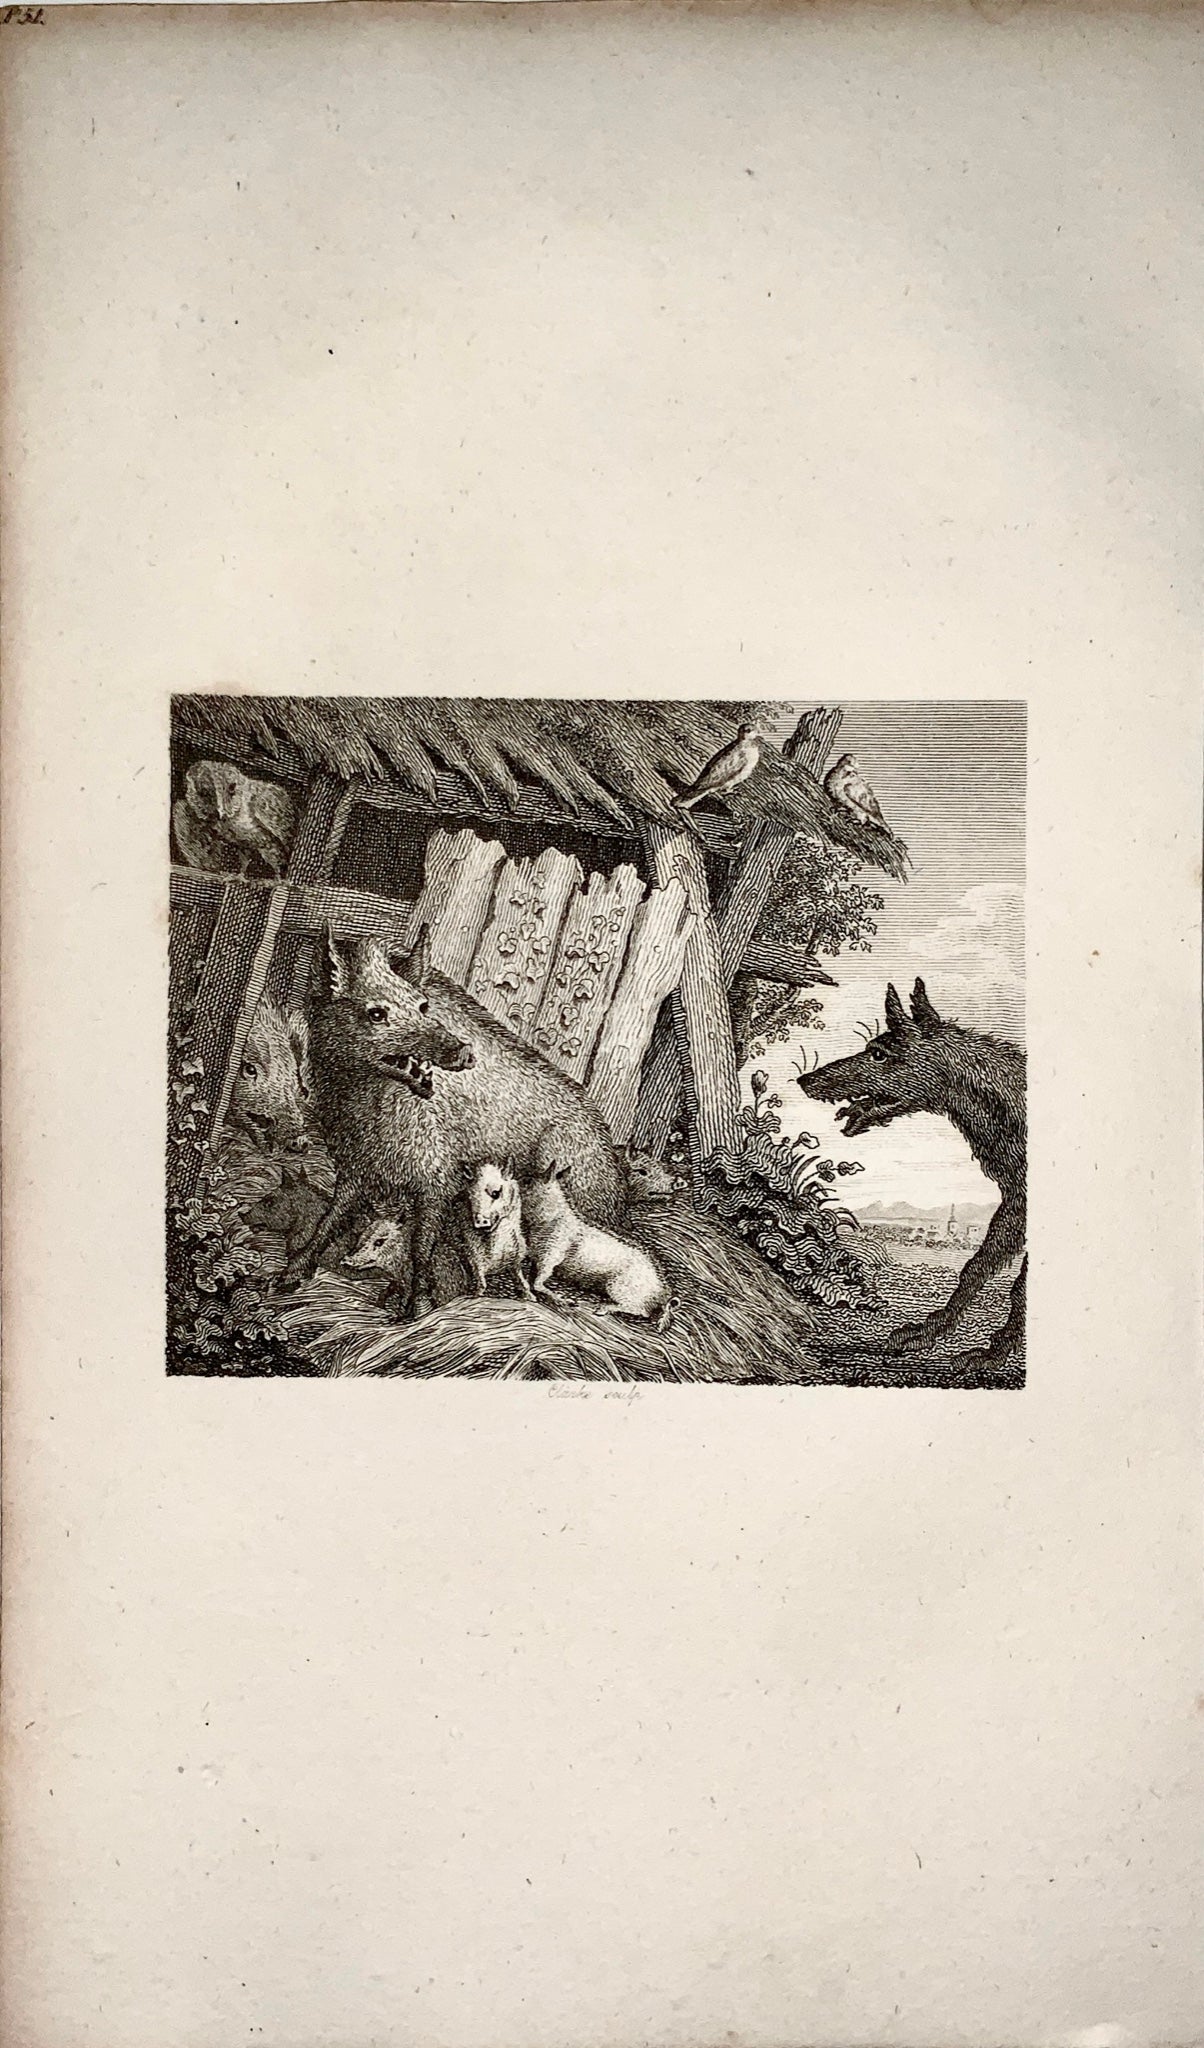 1780 c. Clarke, sculp. - The Sow and the Wolf - copper engraving - Fable, Aesop